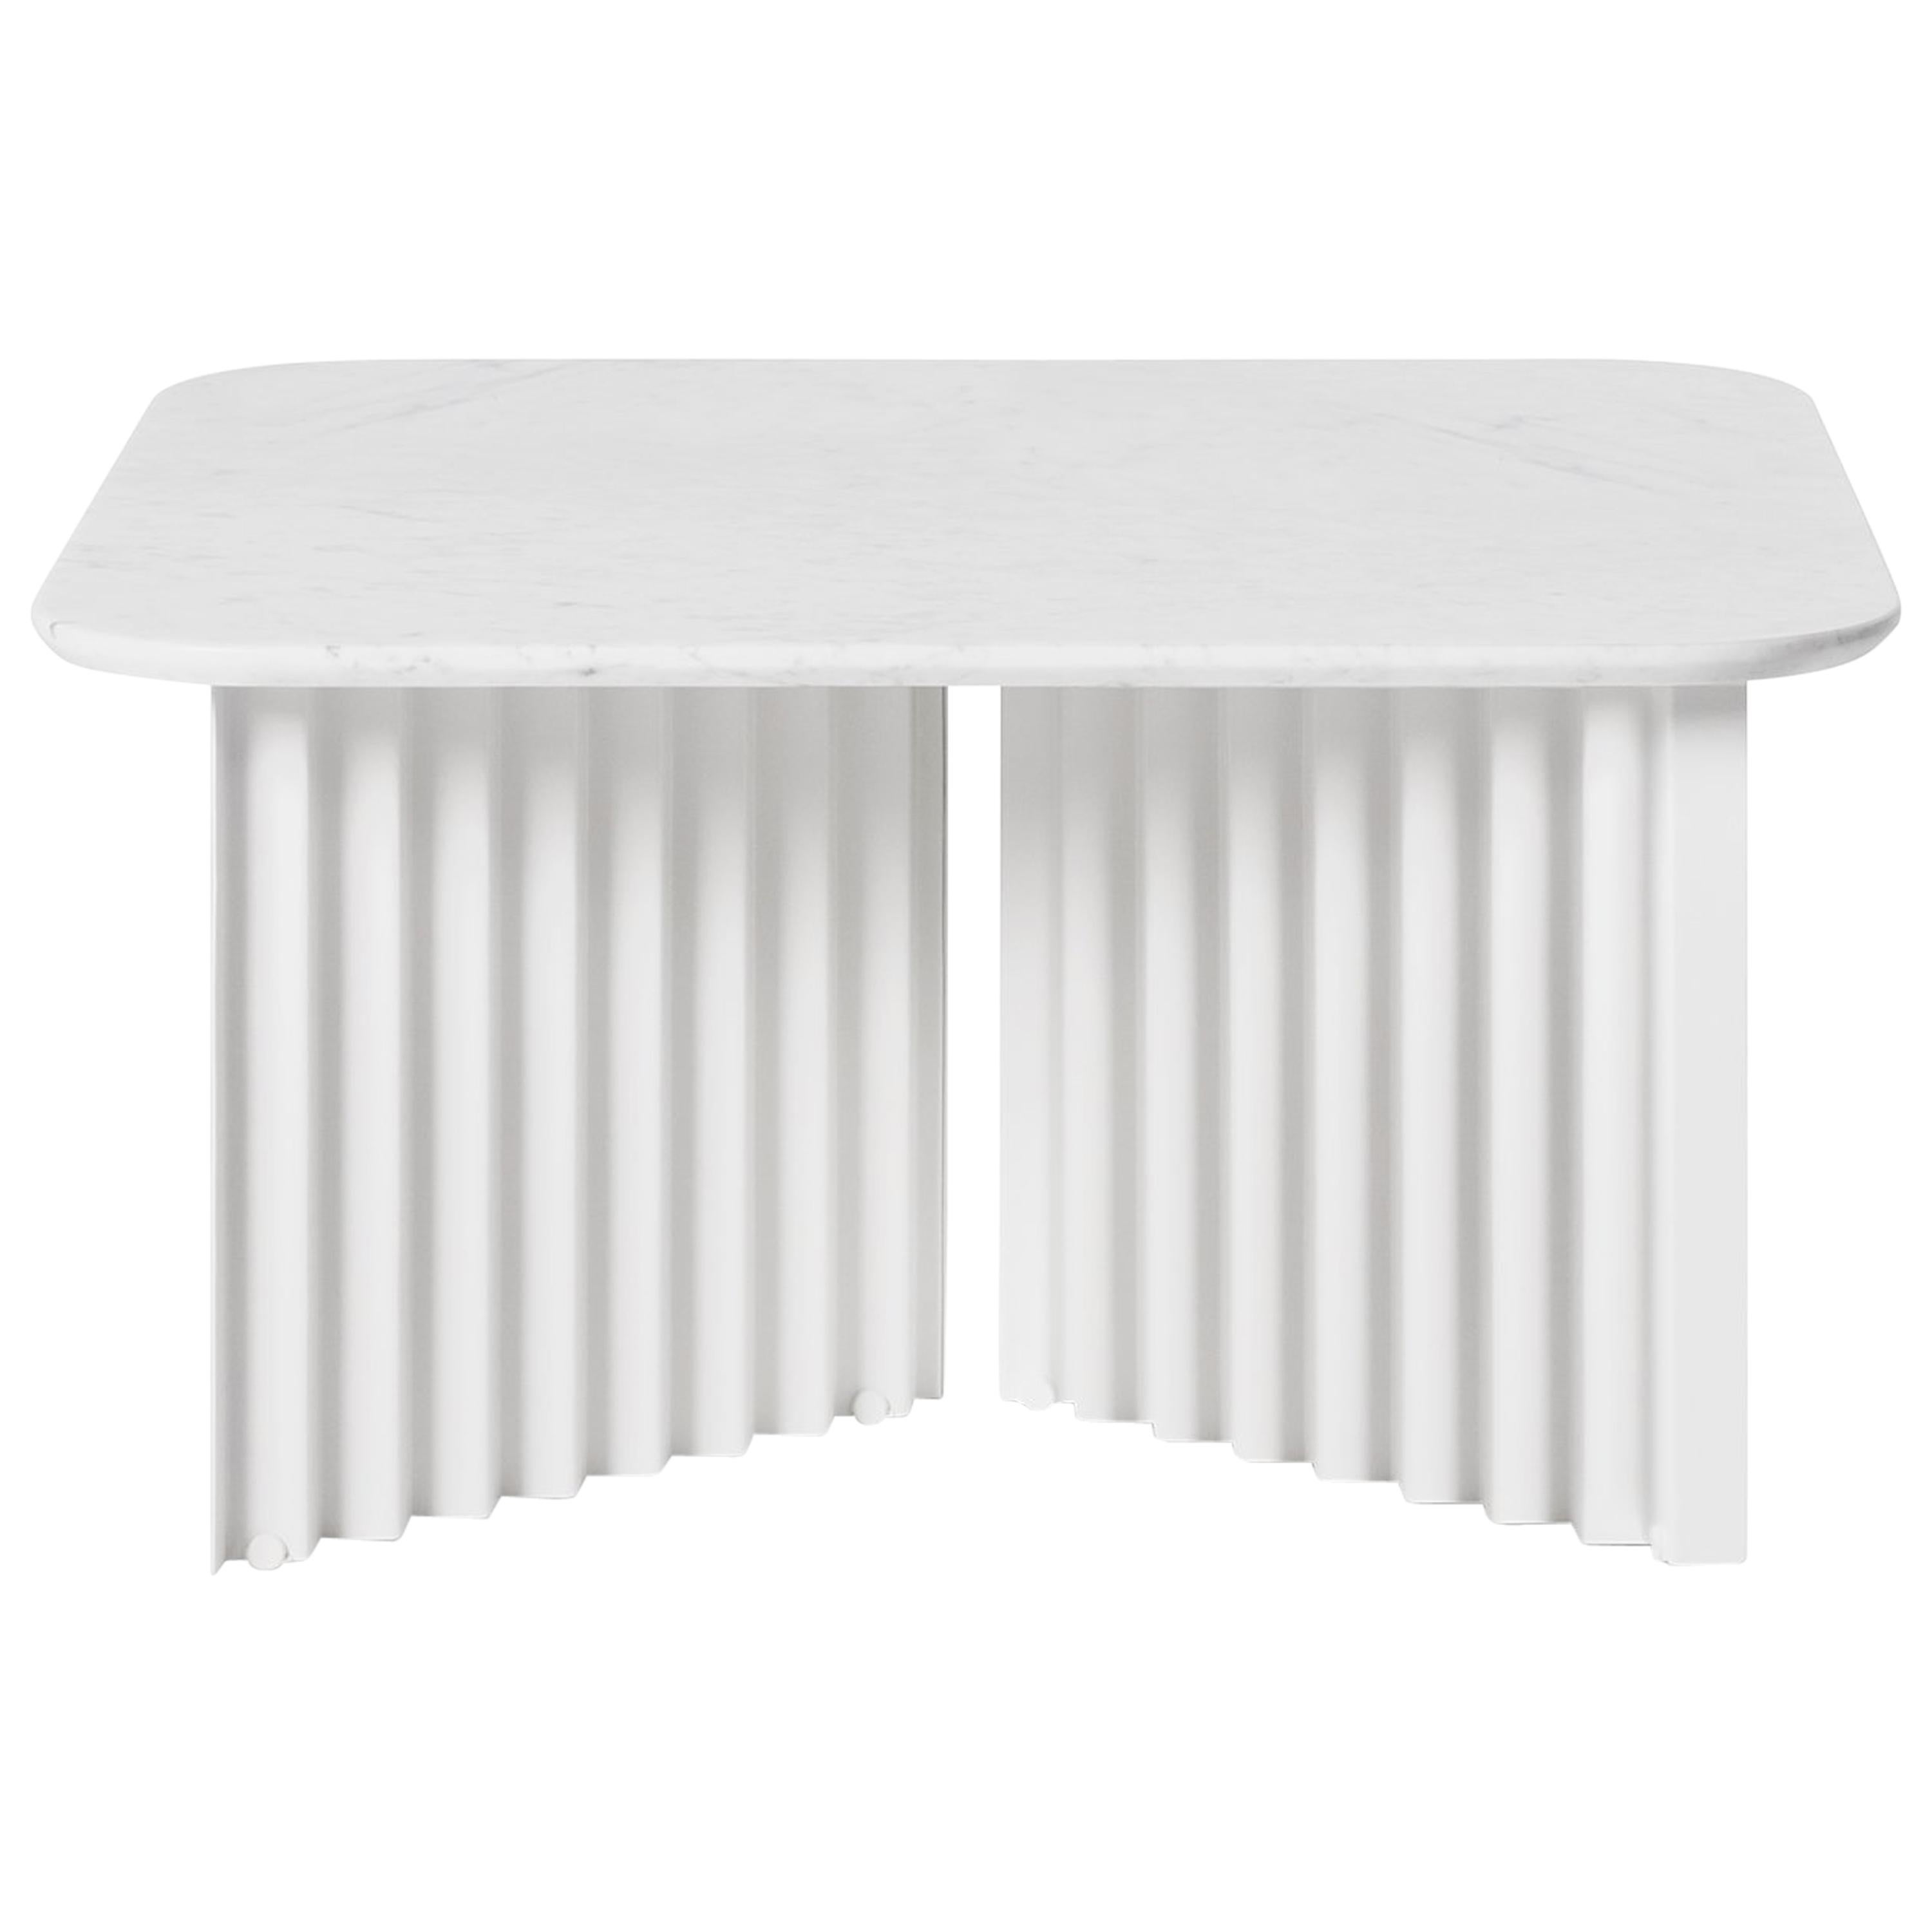 RS Barcelona Plec Medium Table in White Marble by A.P.O.